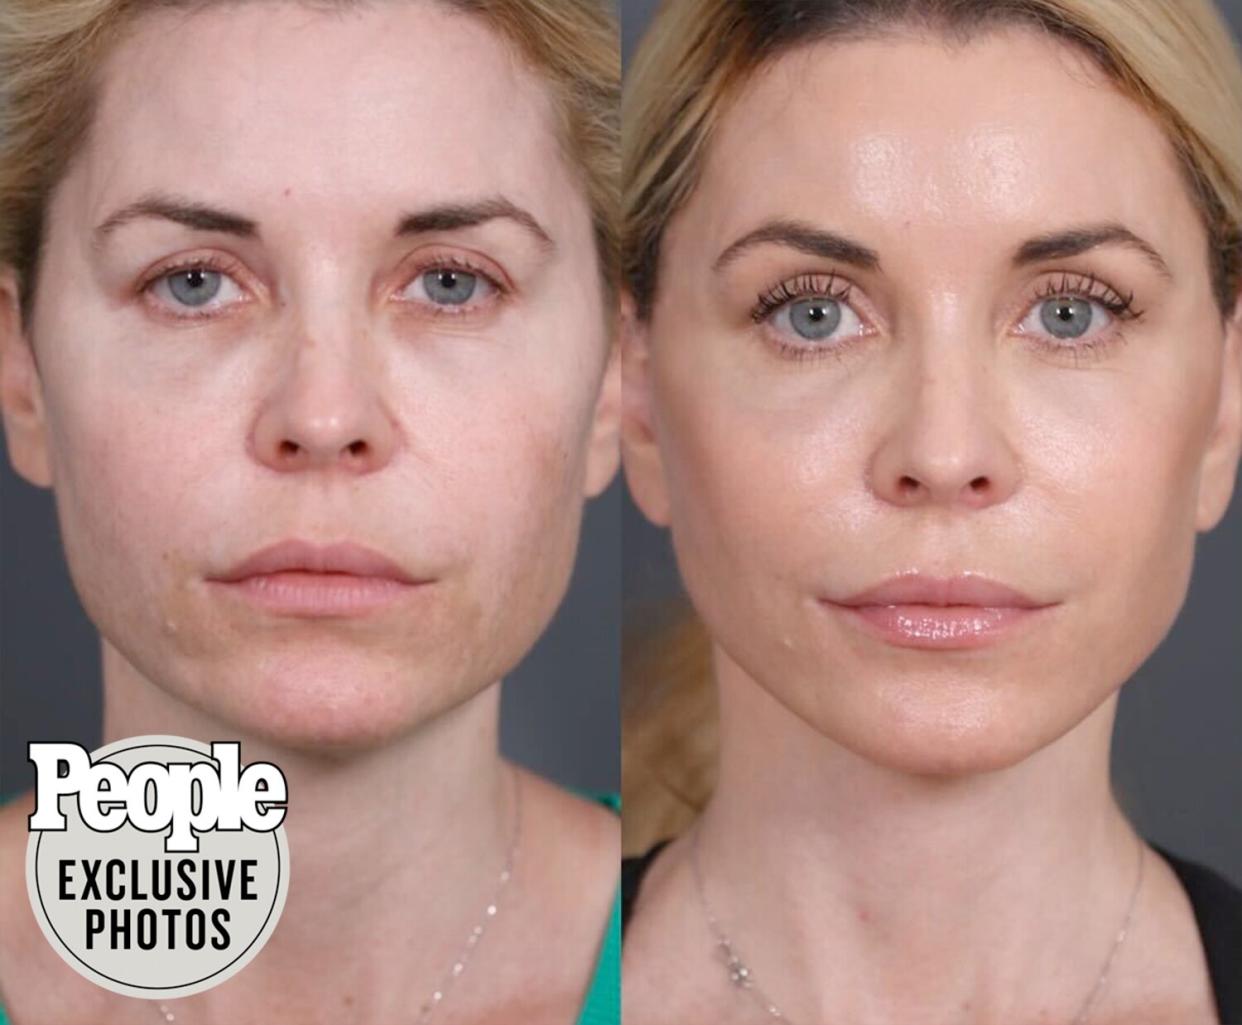 McKenzie Westmore Shares Transformation Photos After Her Face Lift with Dr. Nassif